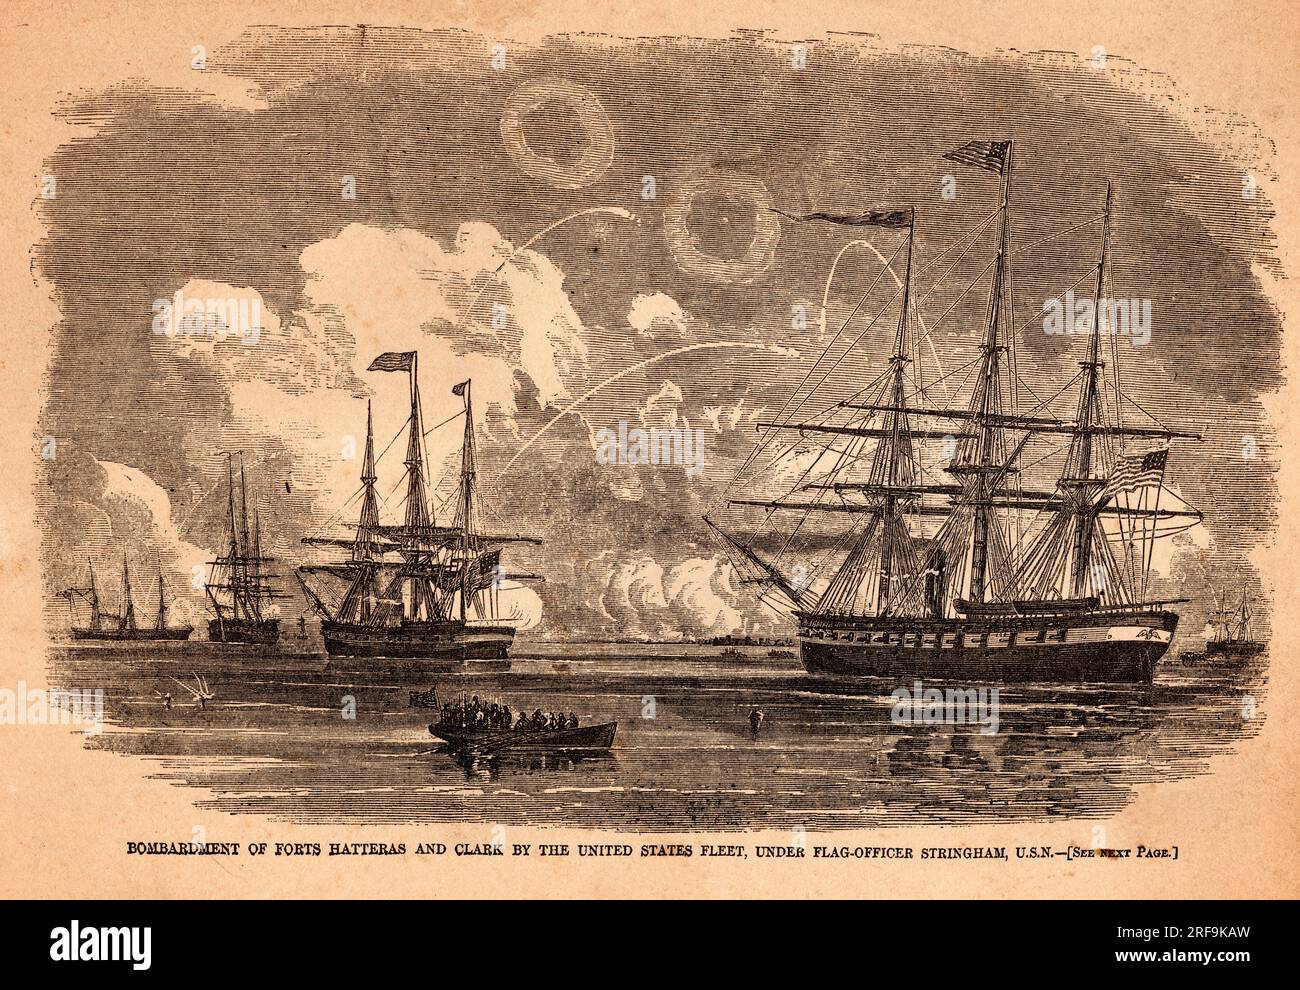 Engraved ilustration of the Bombardment of Fort Hatteras and Clark, a Civil War naval battle, from Harper's Weekly, September 14, 1861, New York, Volume 246. Stock Photo